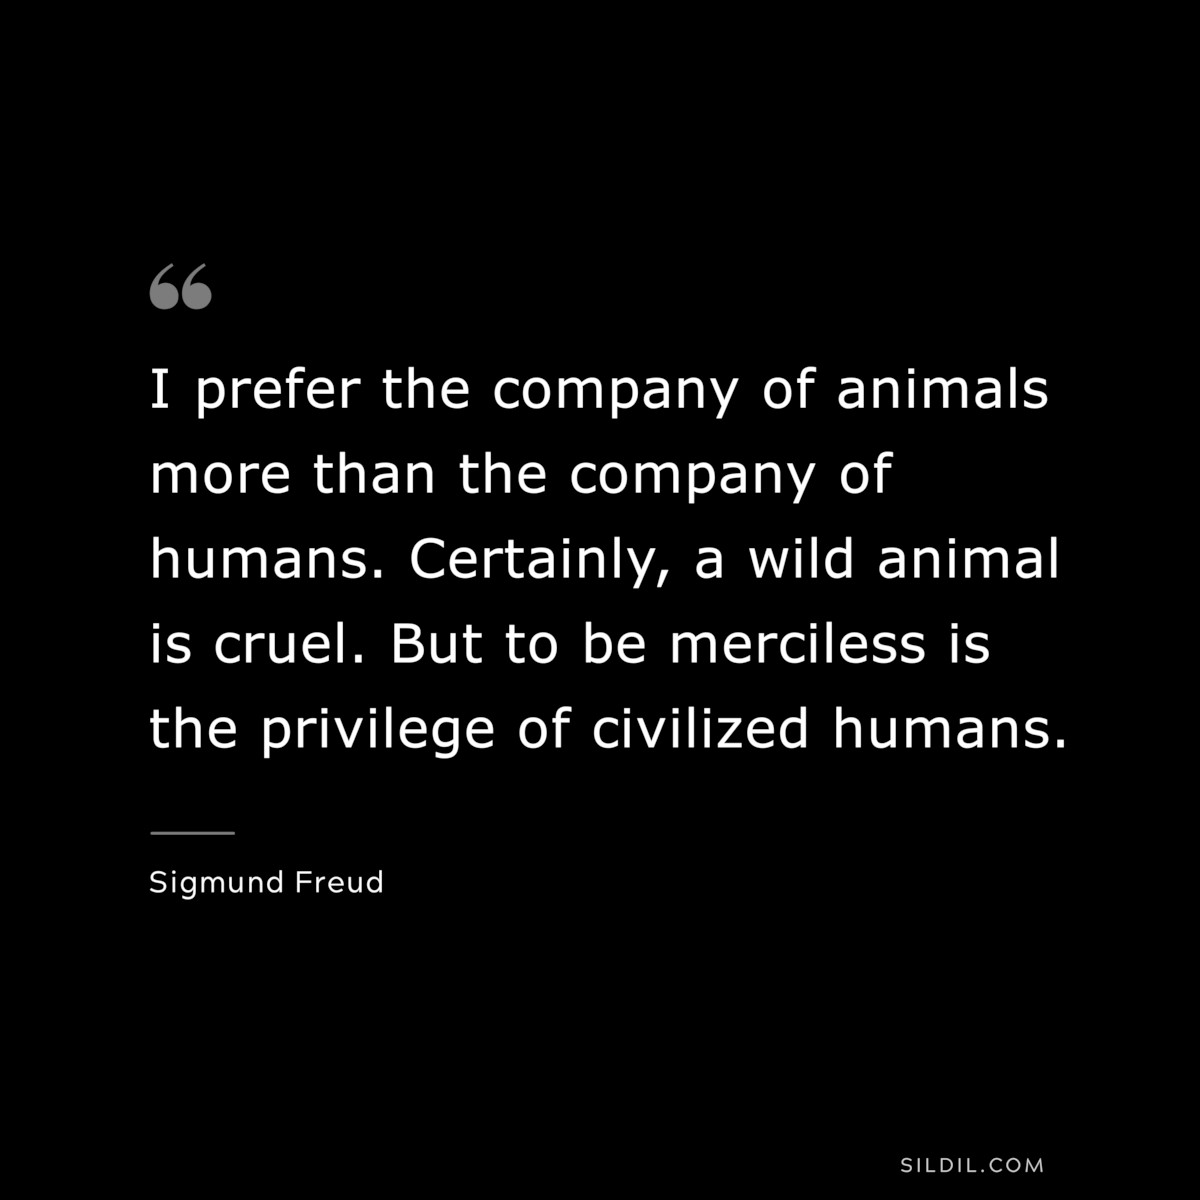 I prefer the company of animals more than the company of humans. Certainly, a wild animal is cruel. But to be merciless is the privilege of civilized humans. ― Sigmund Frued